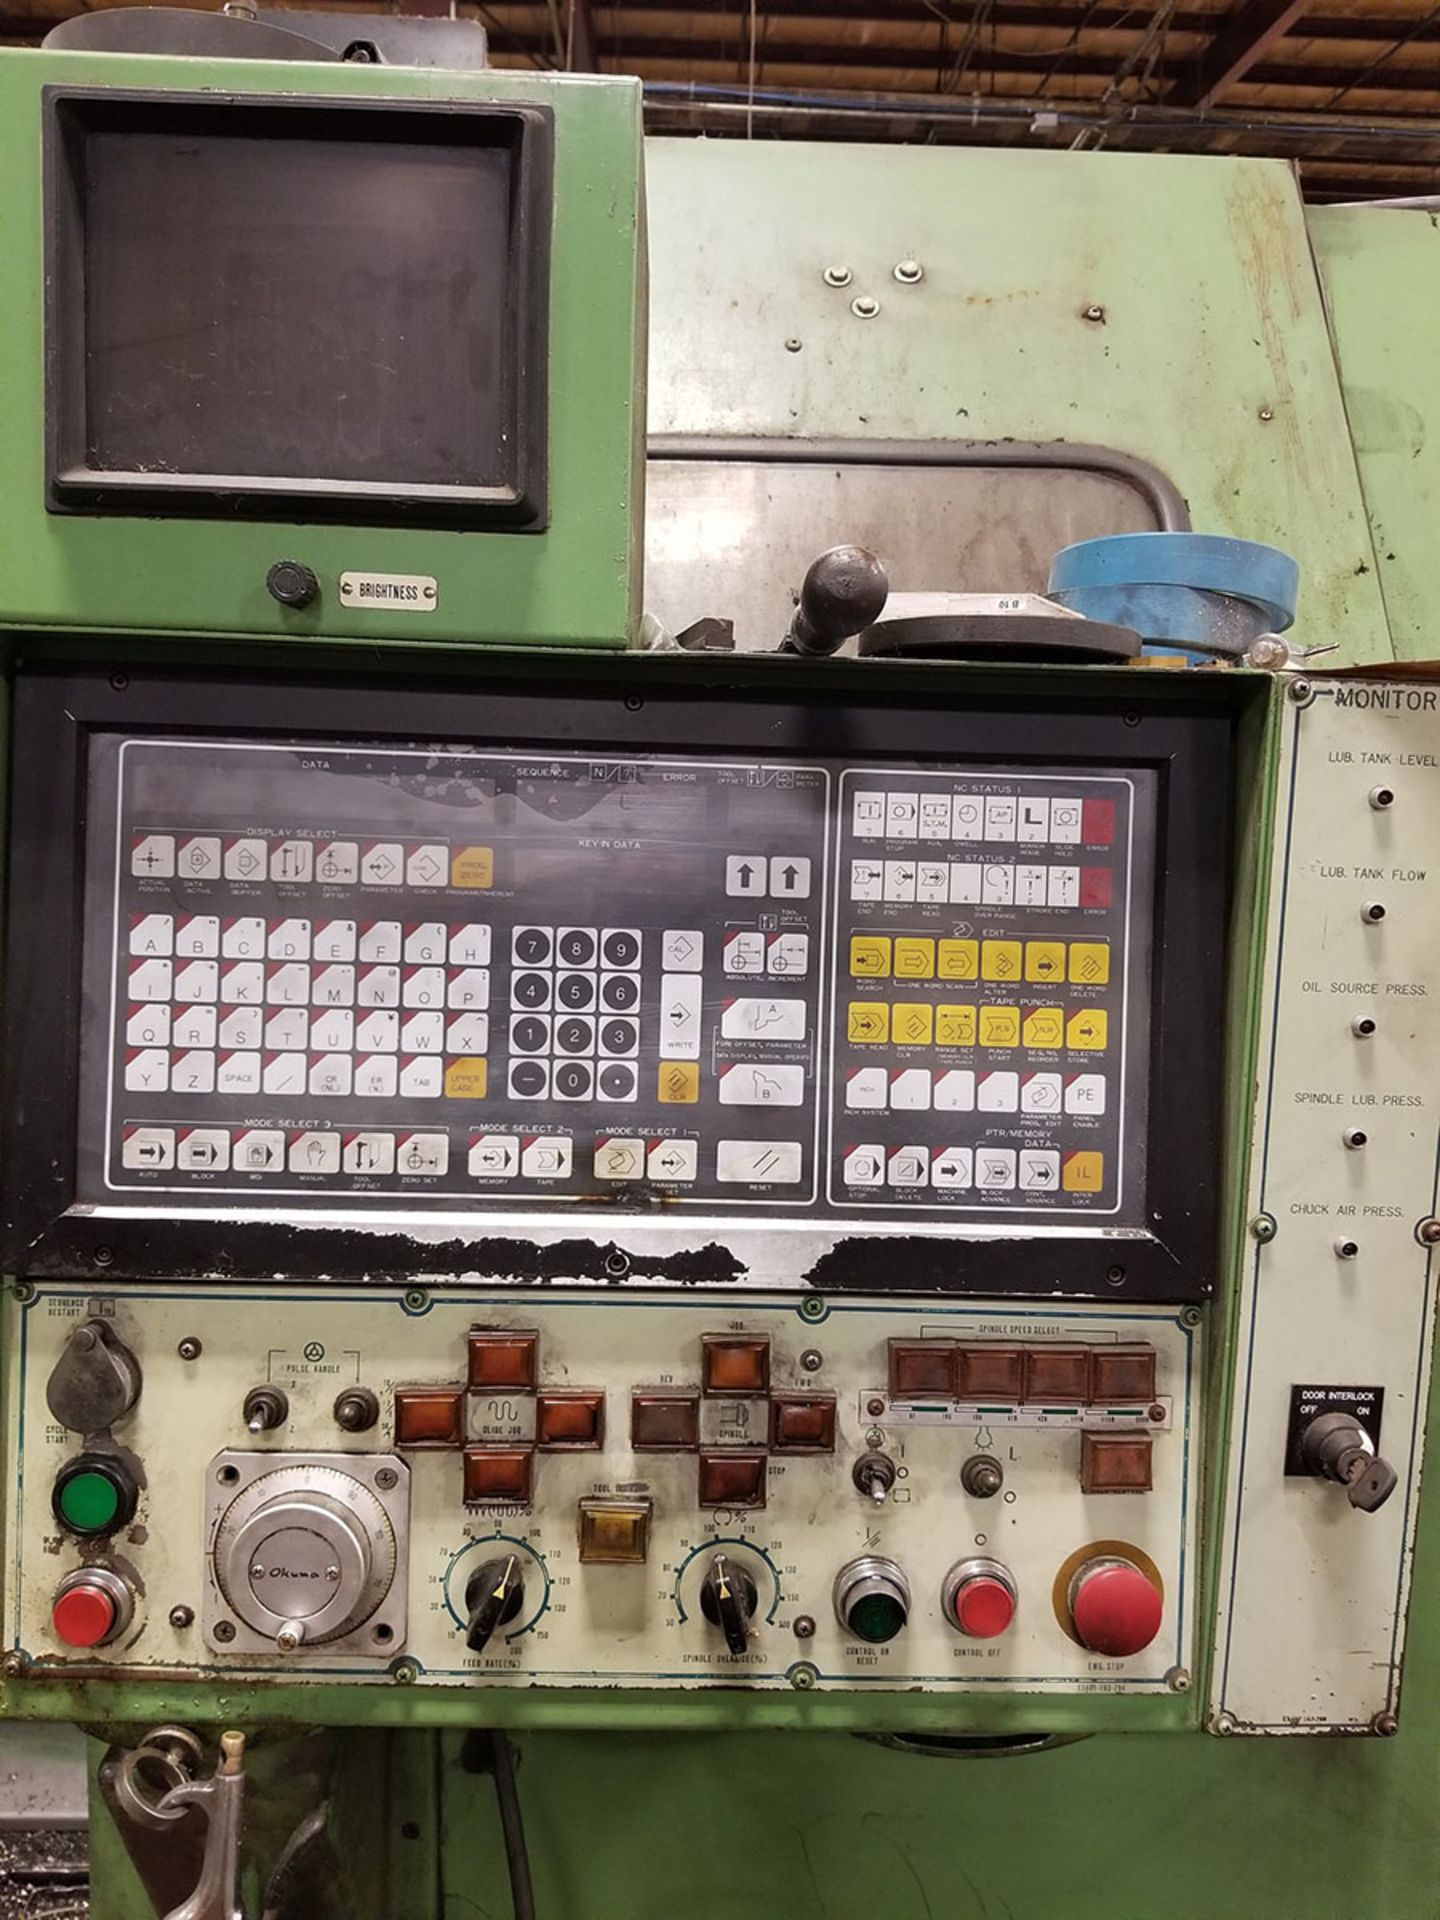 OKUMA LC-30 CNC LATHE, S/N 0319, 8 & 7-TOOL POSITION TURRETS, OUTFEED CHIP CONVEYOR - Image 12 of 16